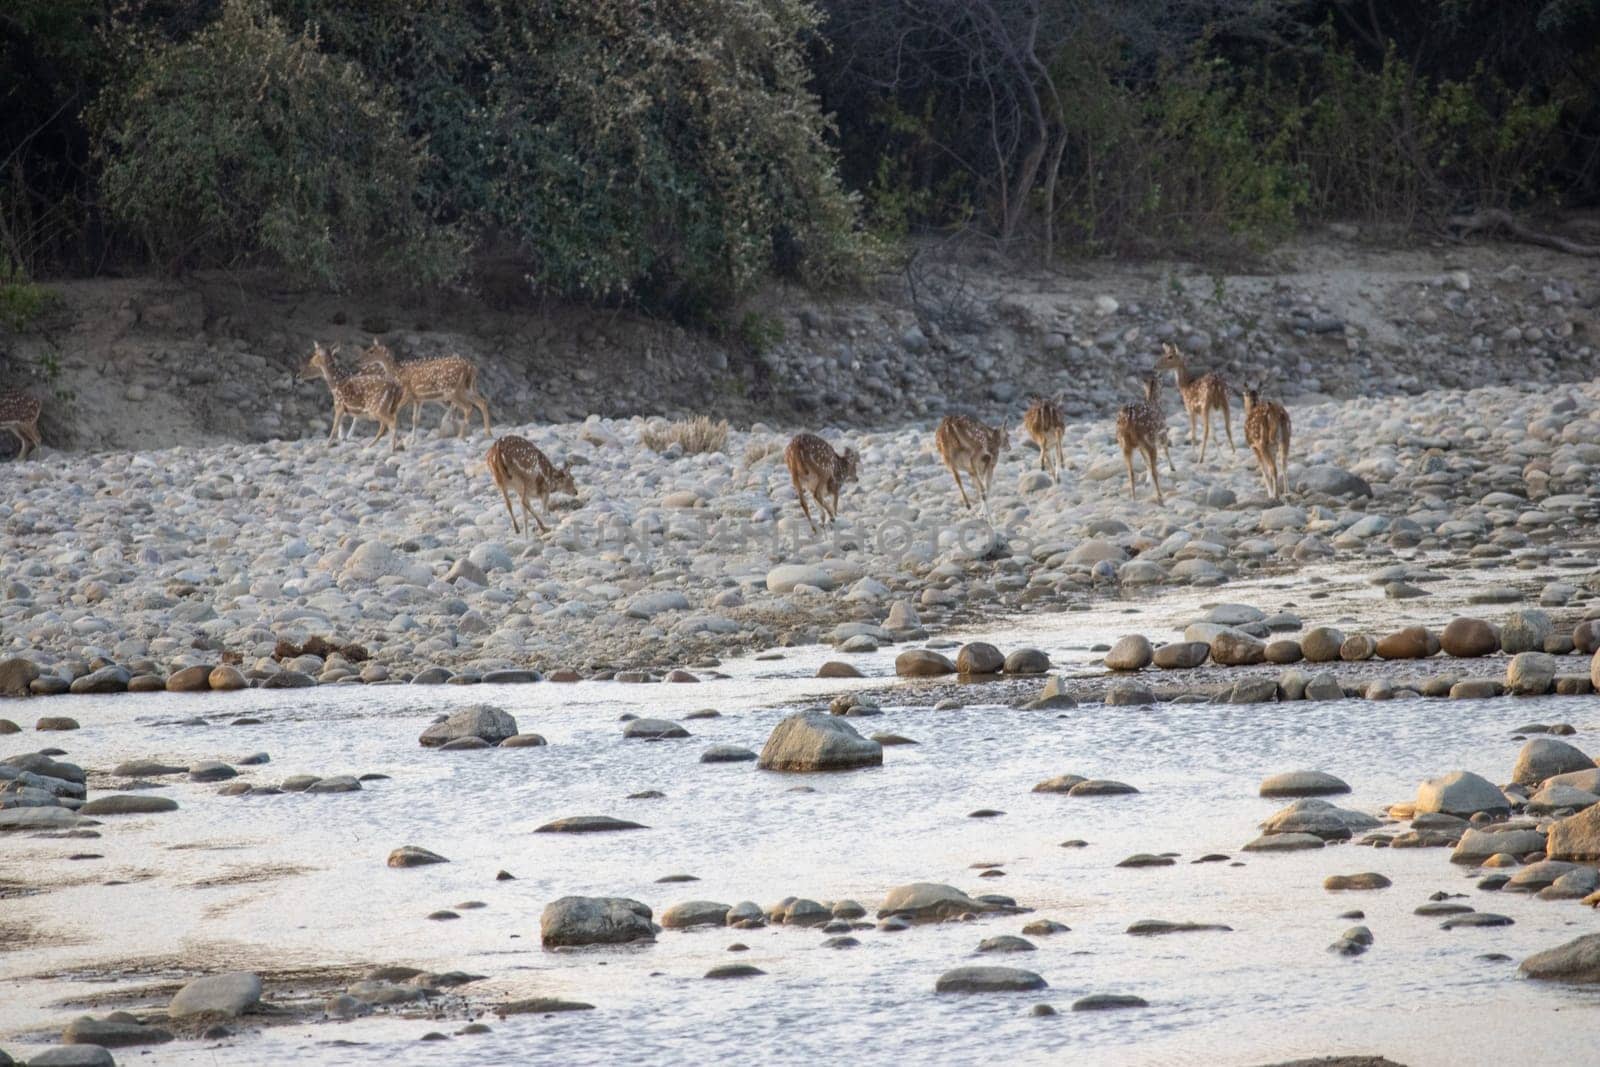 View of Deer in Uttarakhand's Natural Haven by stocksvids